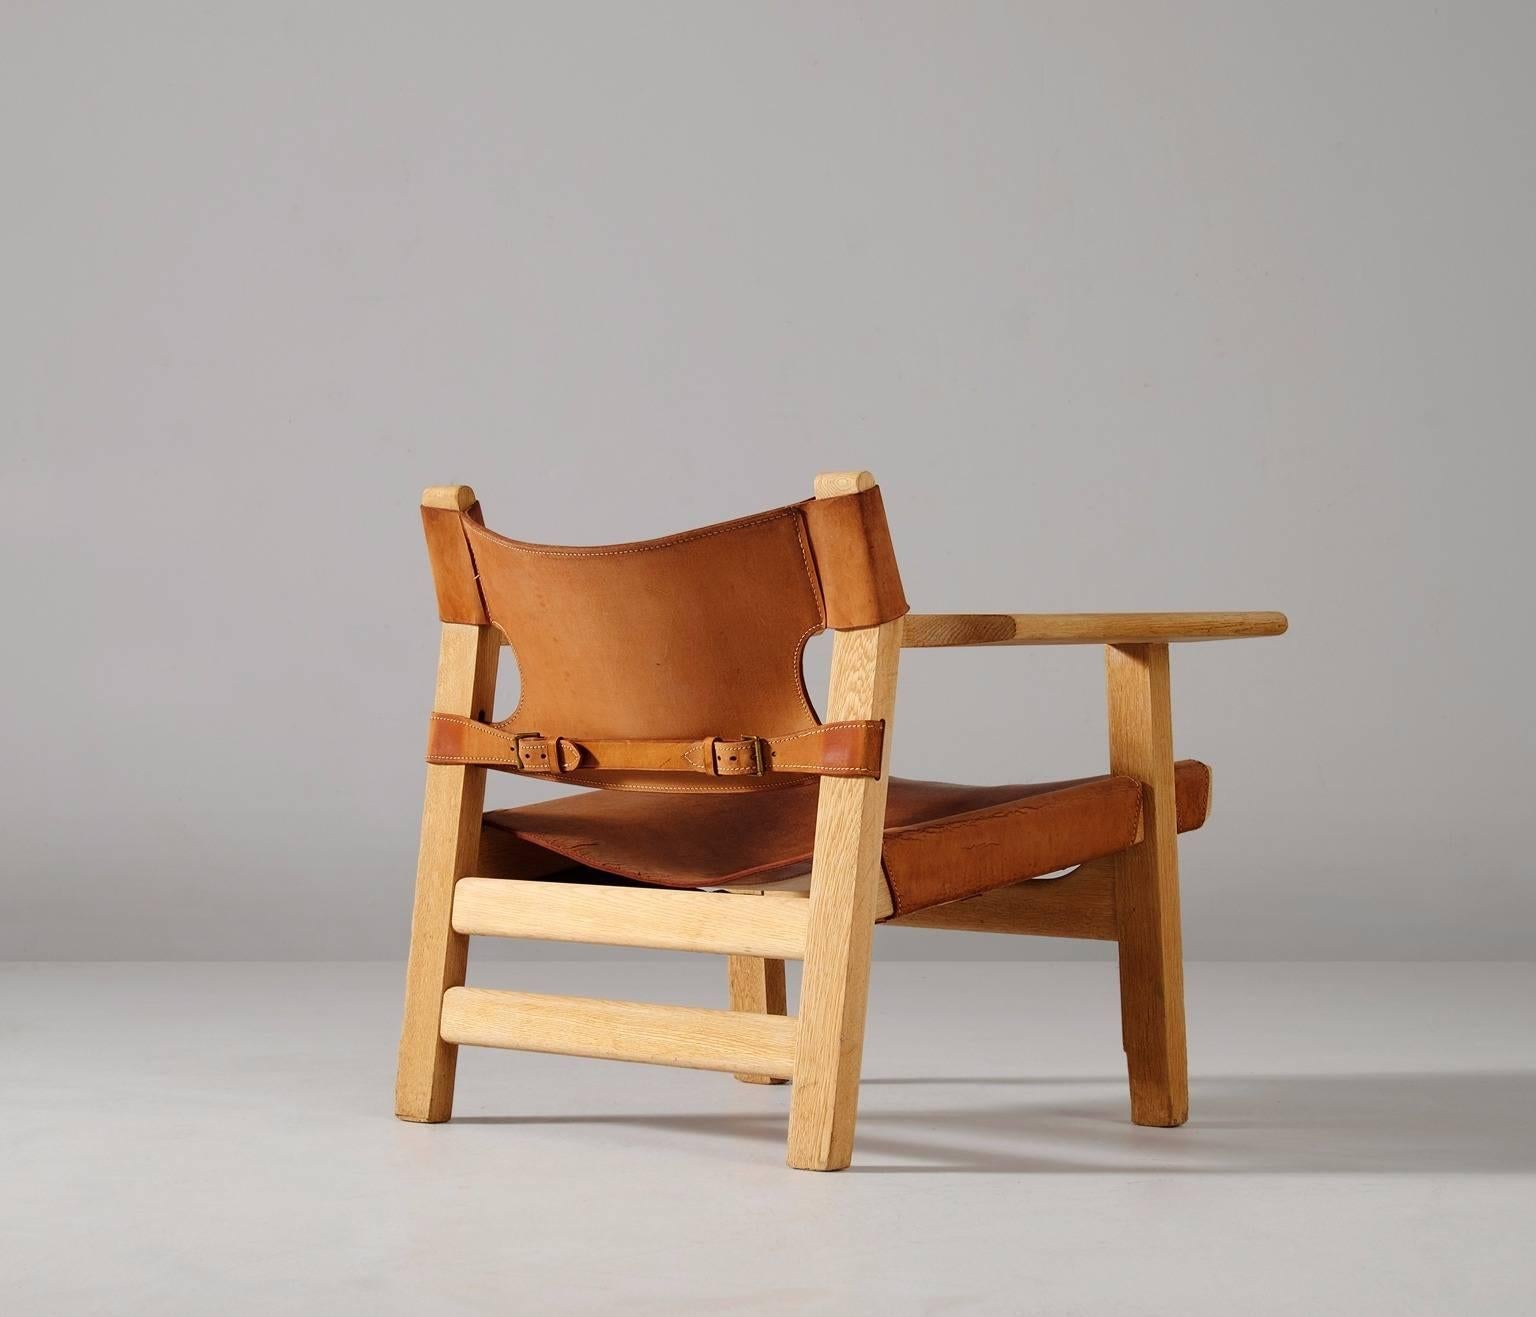 'Spanish Chair' in solid oak and cognac leather by Børge Mogensen. Manufactured by Fredericia Furniture, Denmark, circa 1950.

This design by Borge Mogensen has a strong appearance. The sincere constructions and ditto type of upholstery, give the